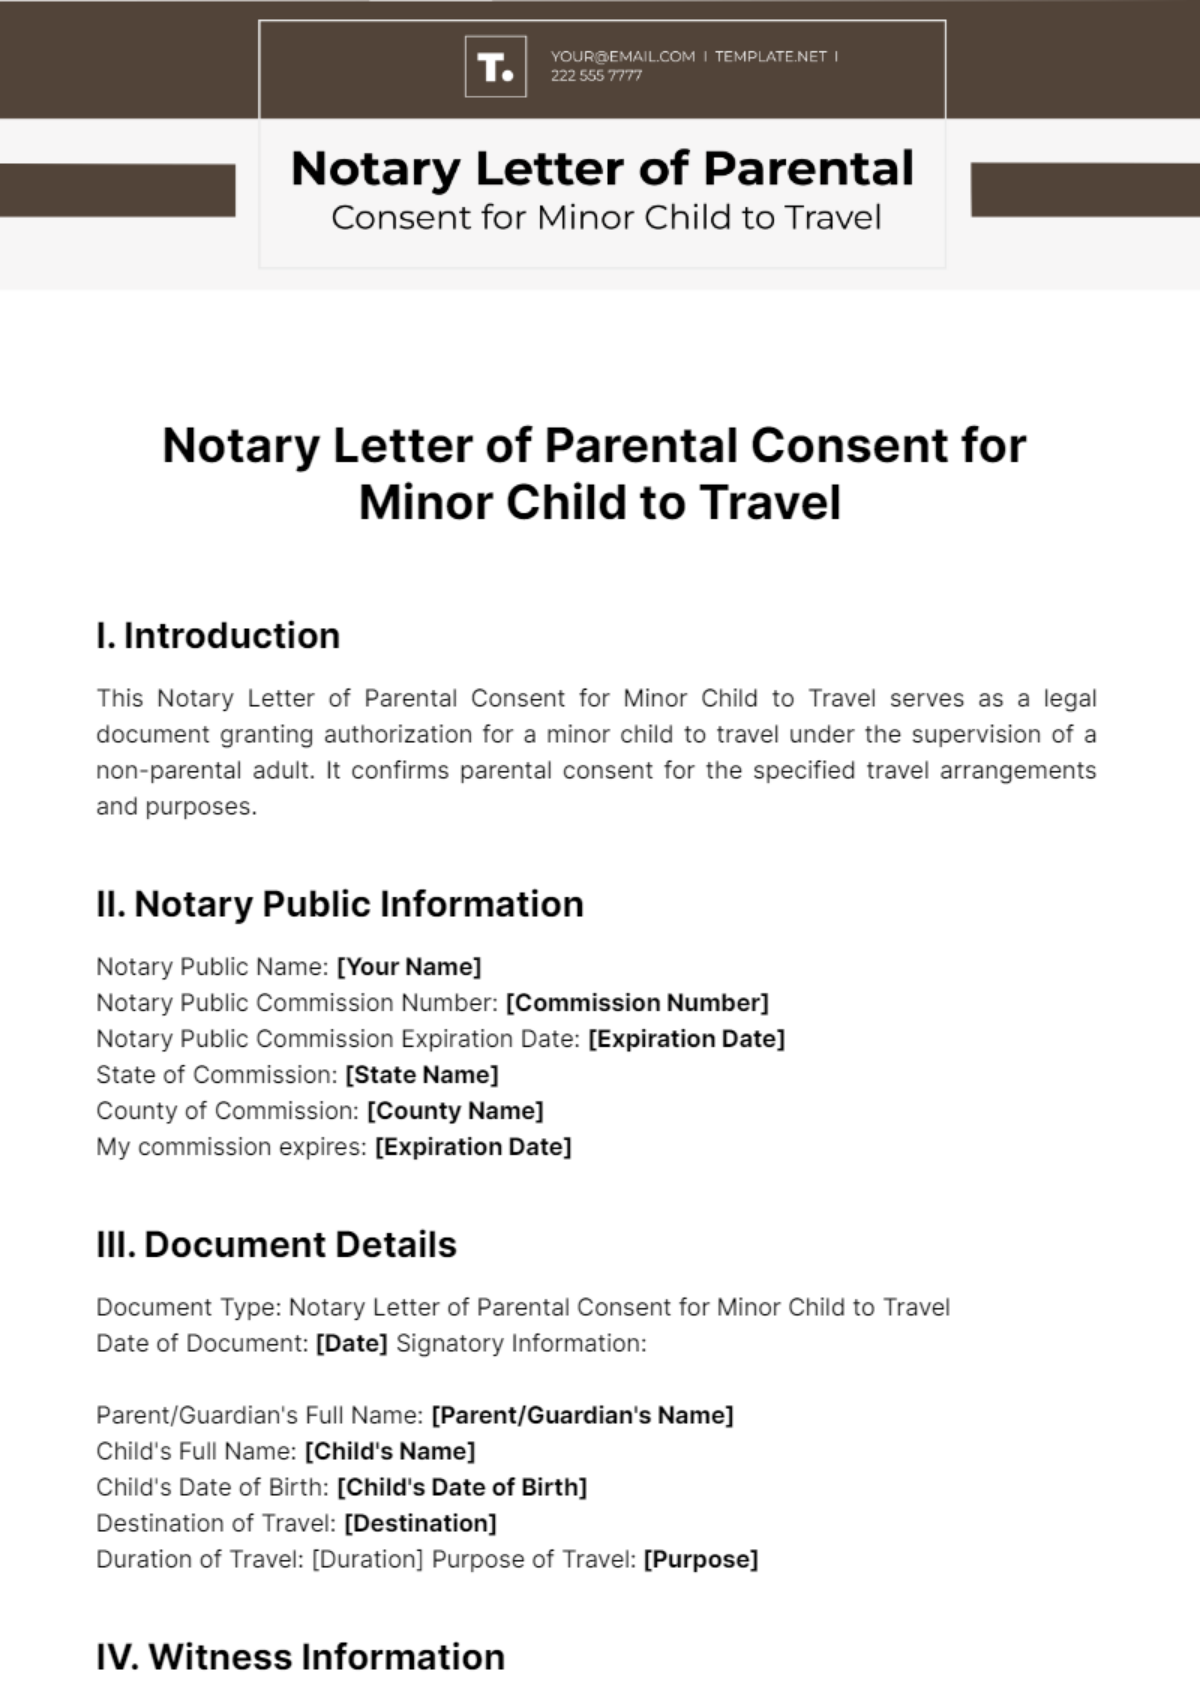 Free Notary Letter of Parental Consent for Minor Child to Travel Template